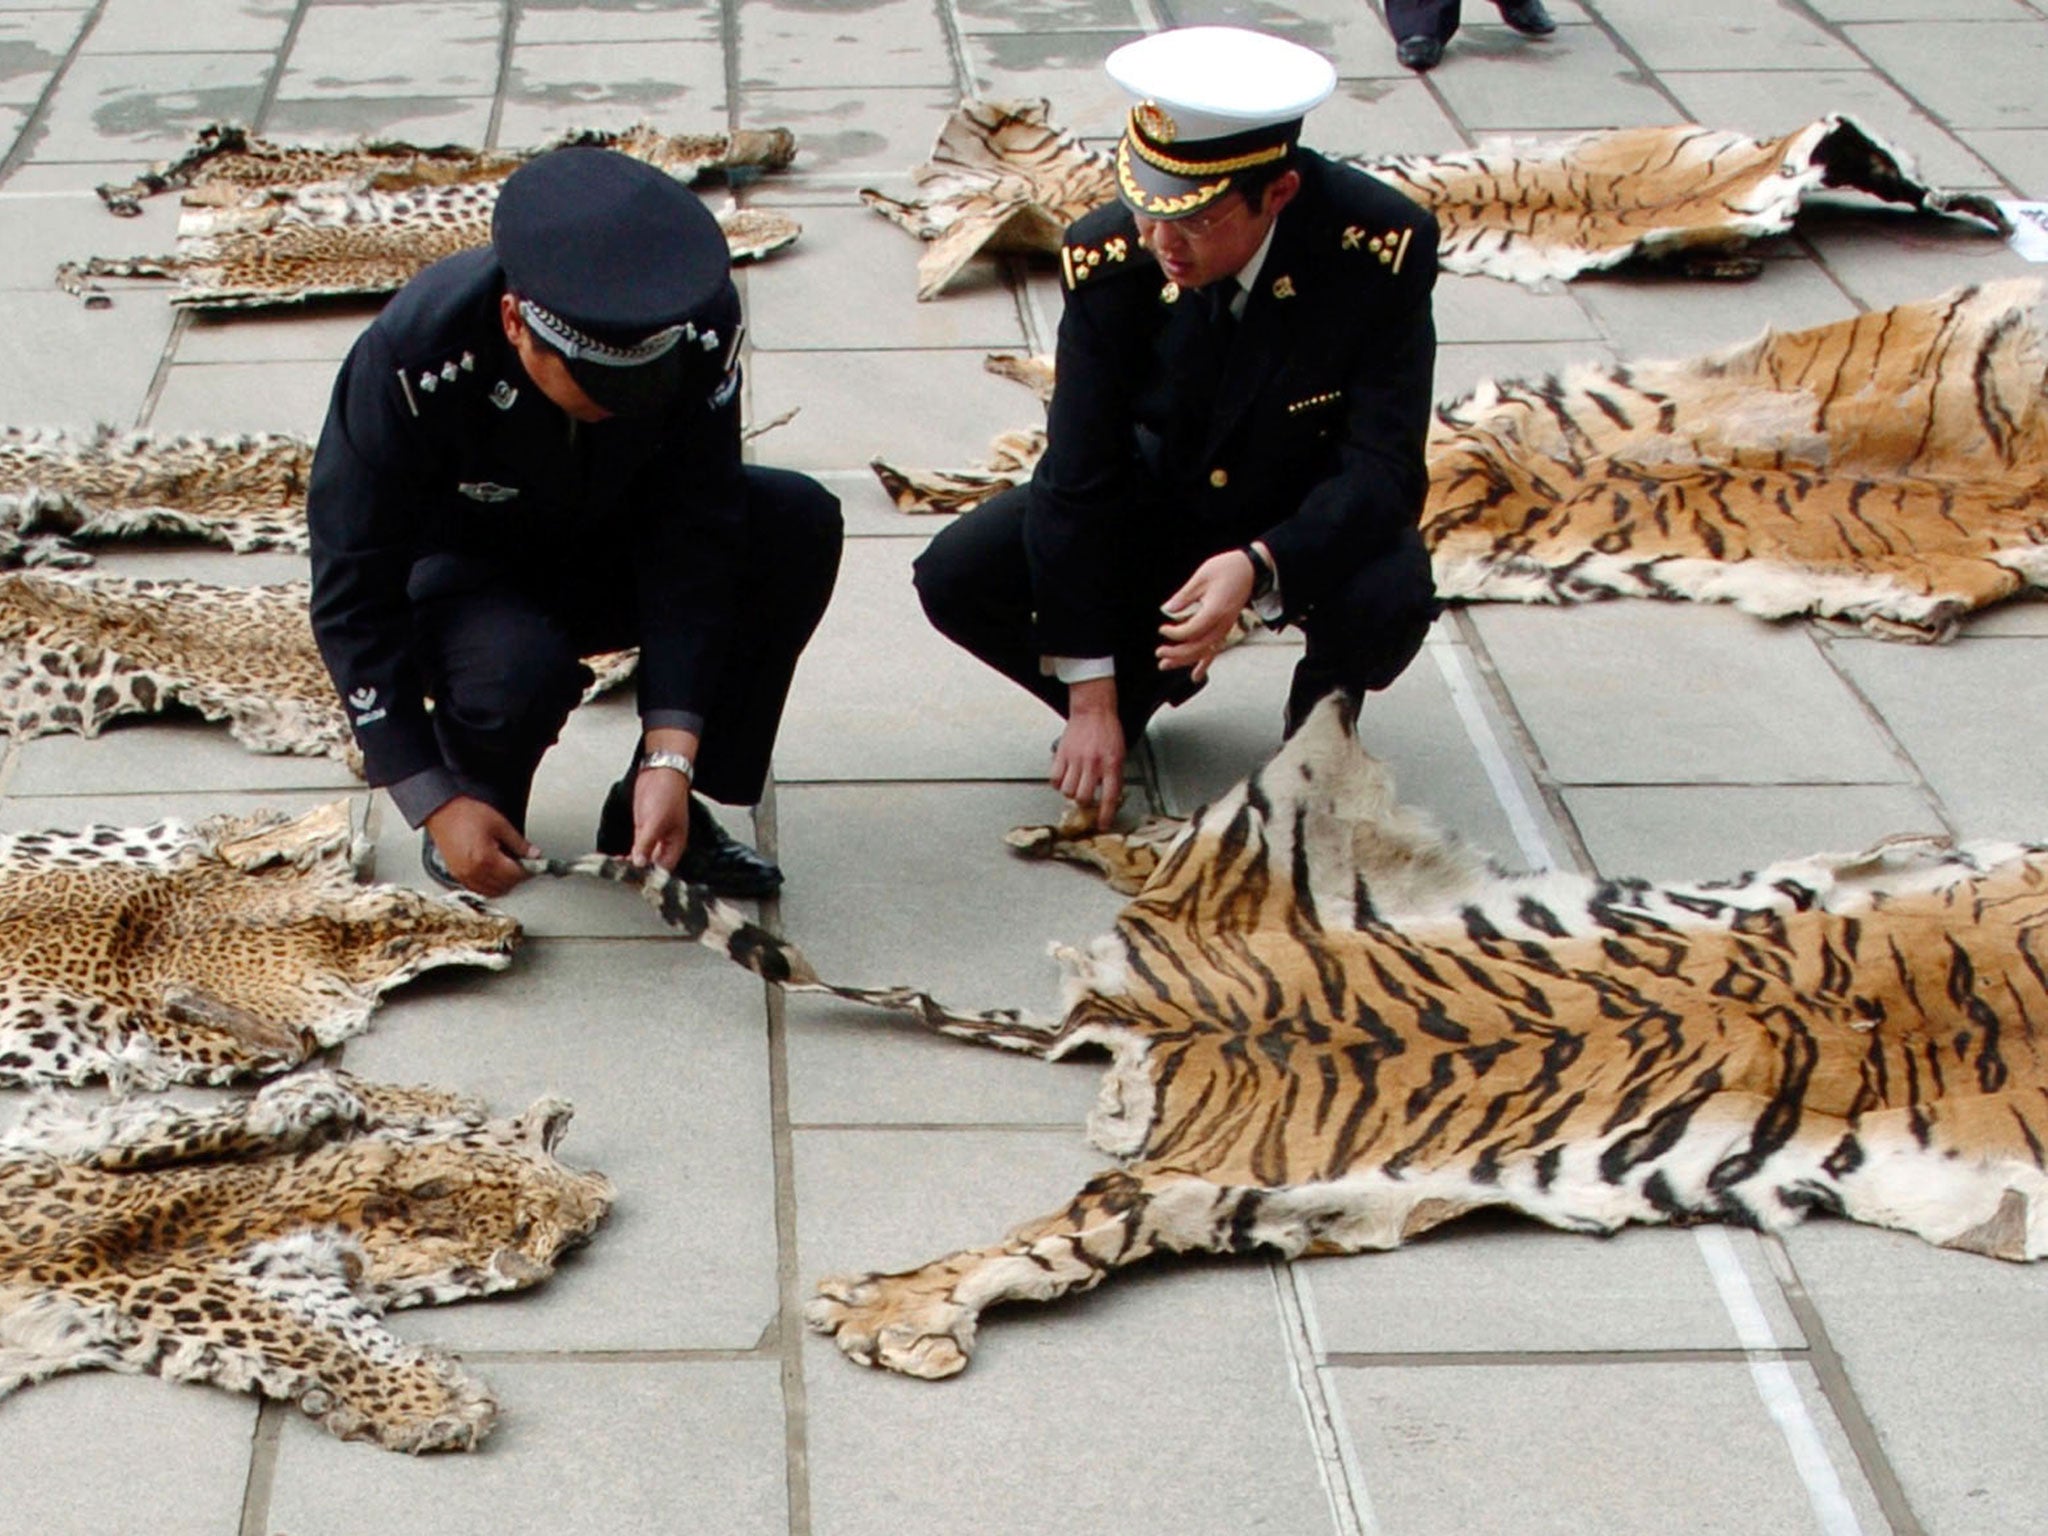 File: Chinese officials inspect a piece of tiger skin on June 14, 2005 in Lhasa of Tibet Autonomous Region, China